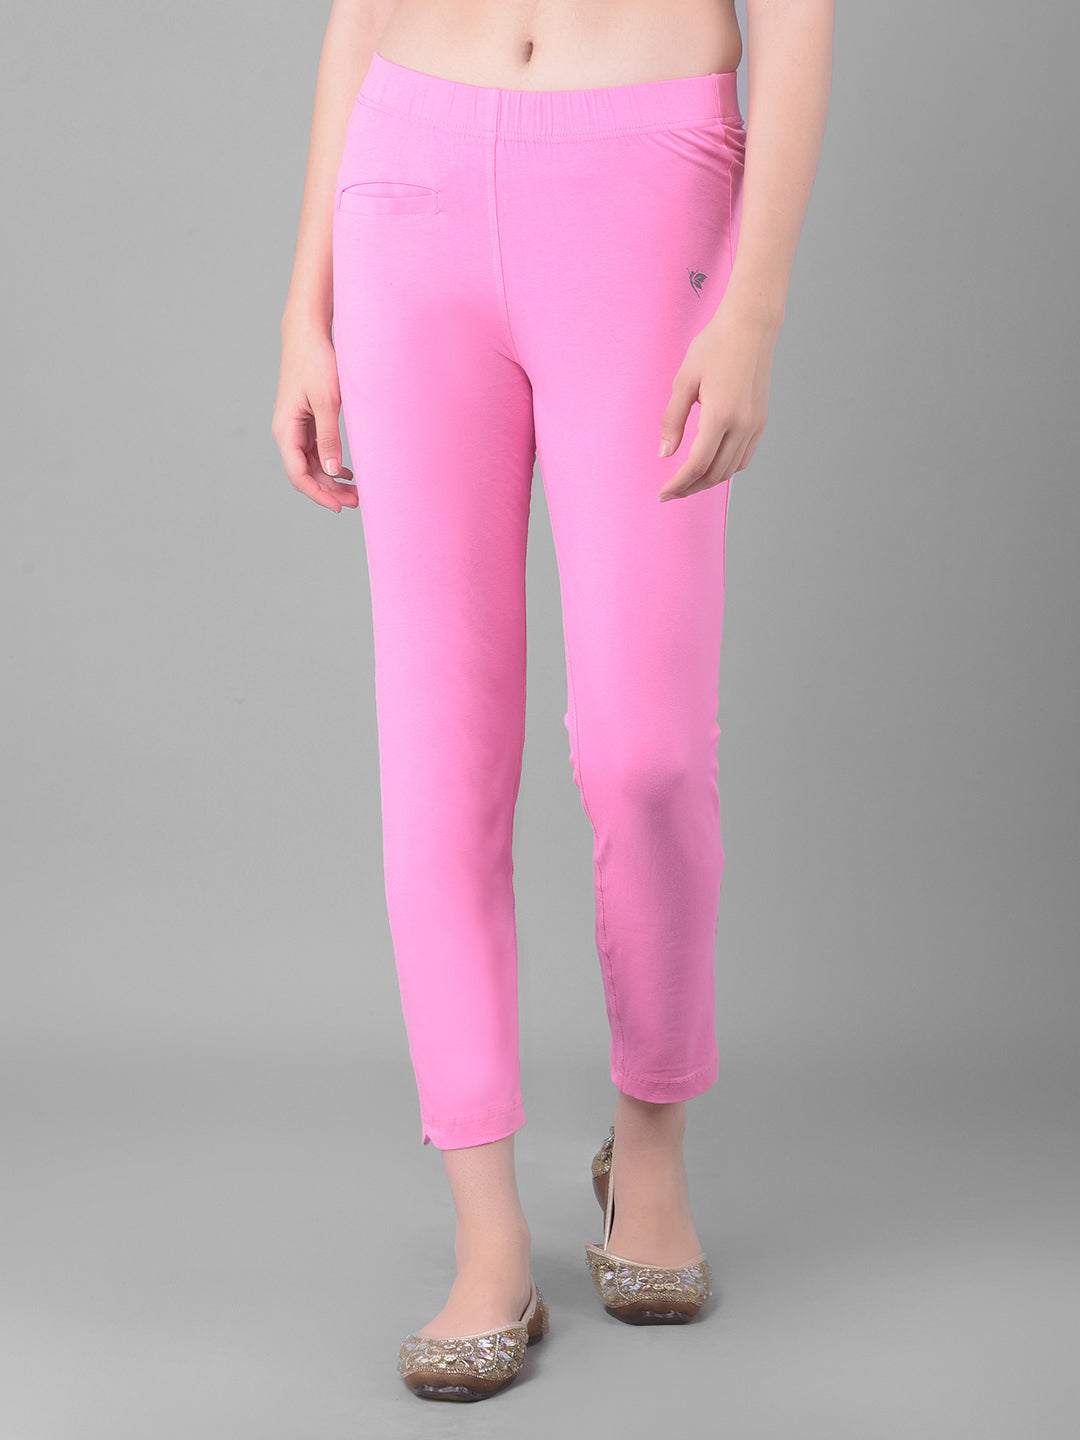 Comfort Lady Straight Pants (Free Size), 54% OFF